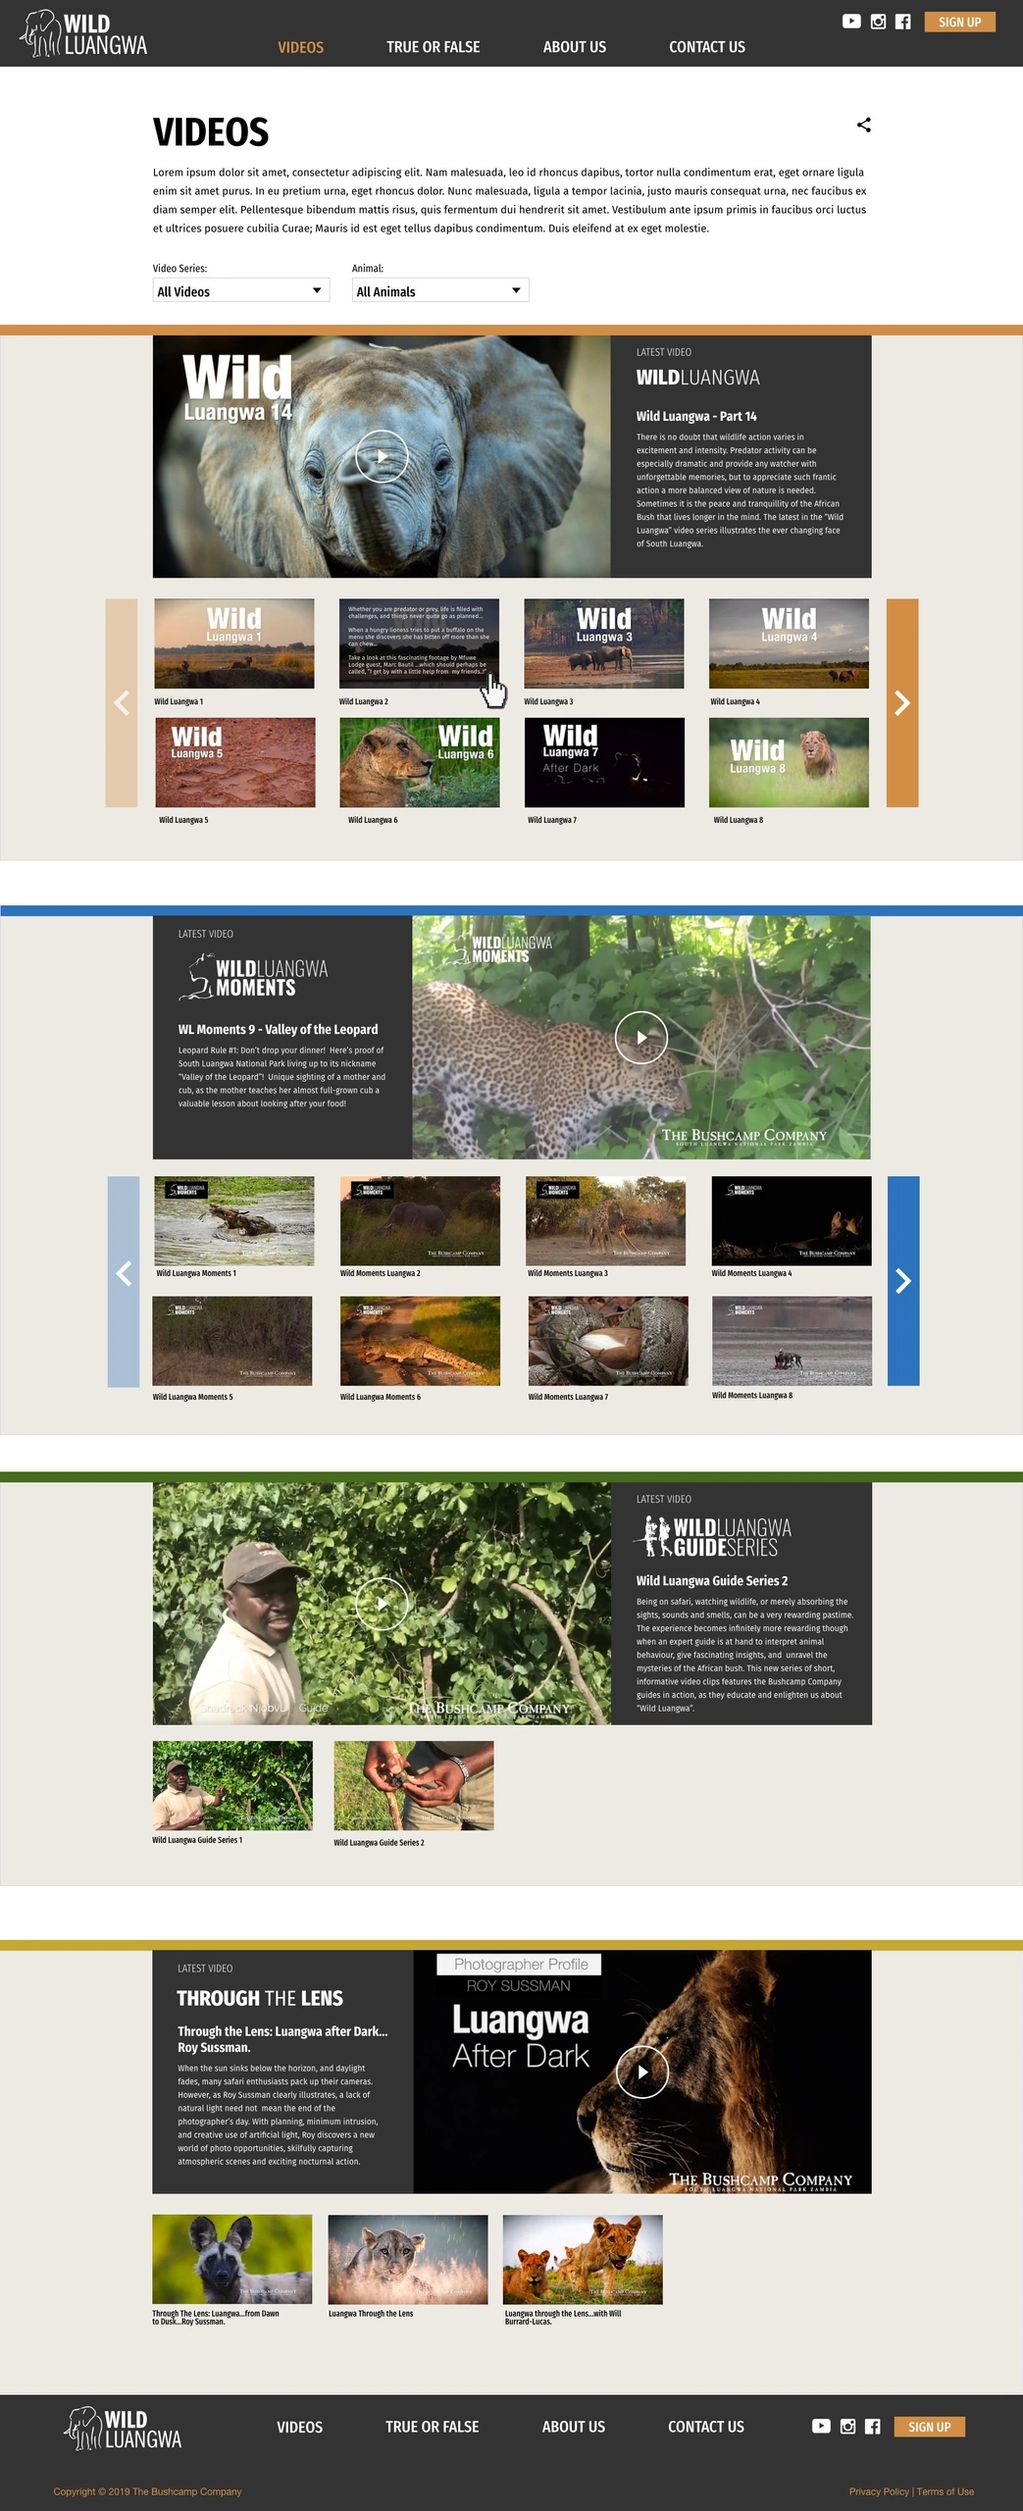 Videos of wildlife from series: Wild Luangwa, WL Moments, WL Guide, and Luangwa after dark